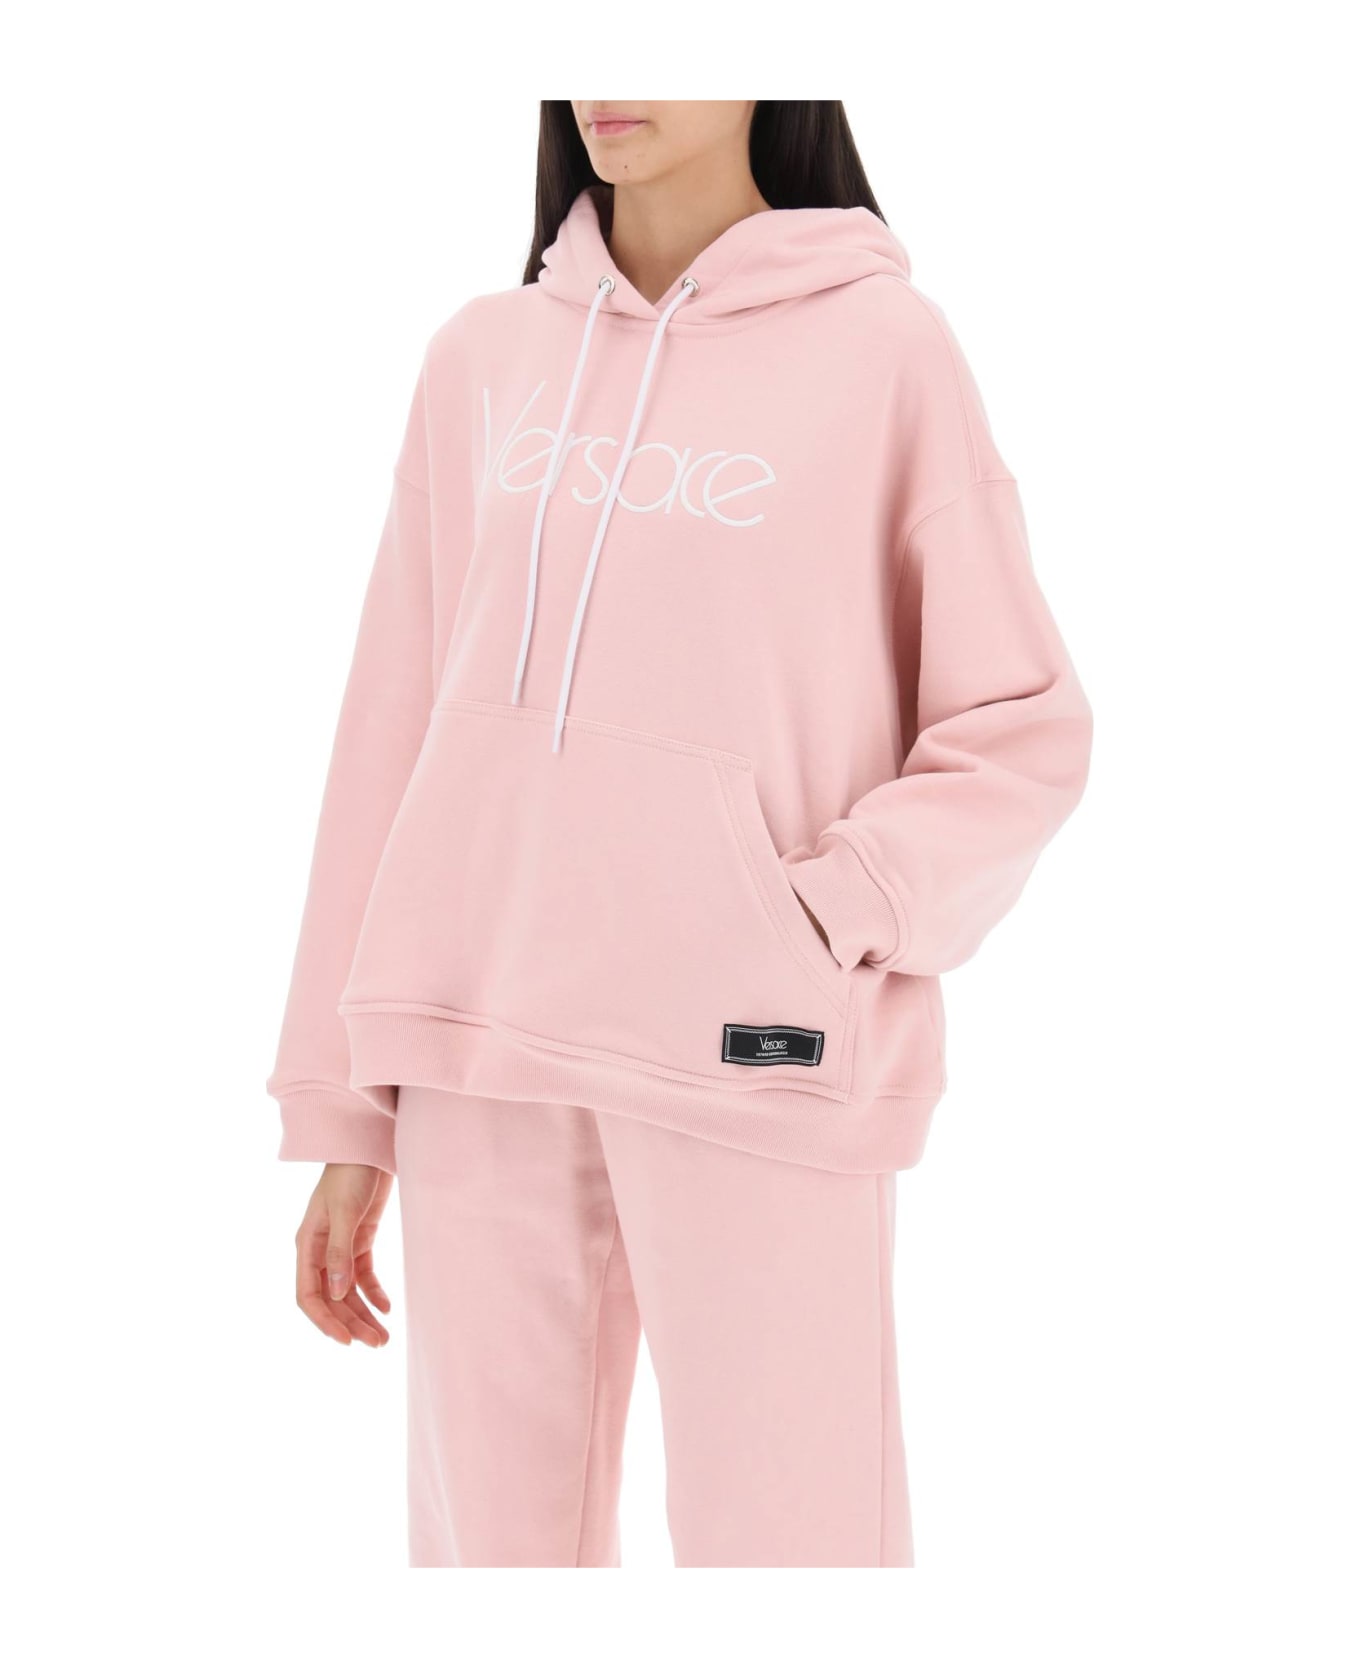 Versace Hoodie With 1978 Re-edition Logo - PINK WHITE (Pink)